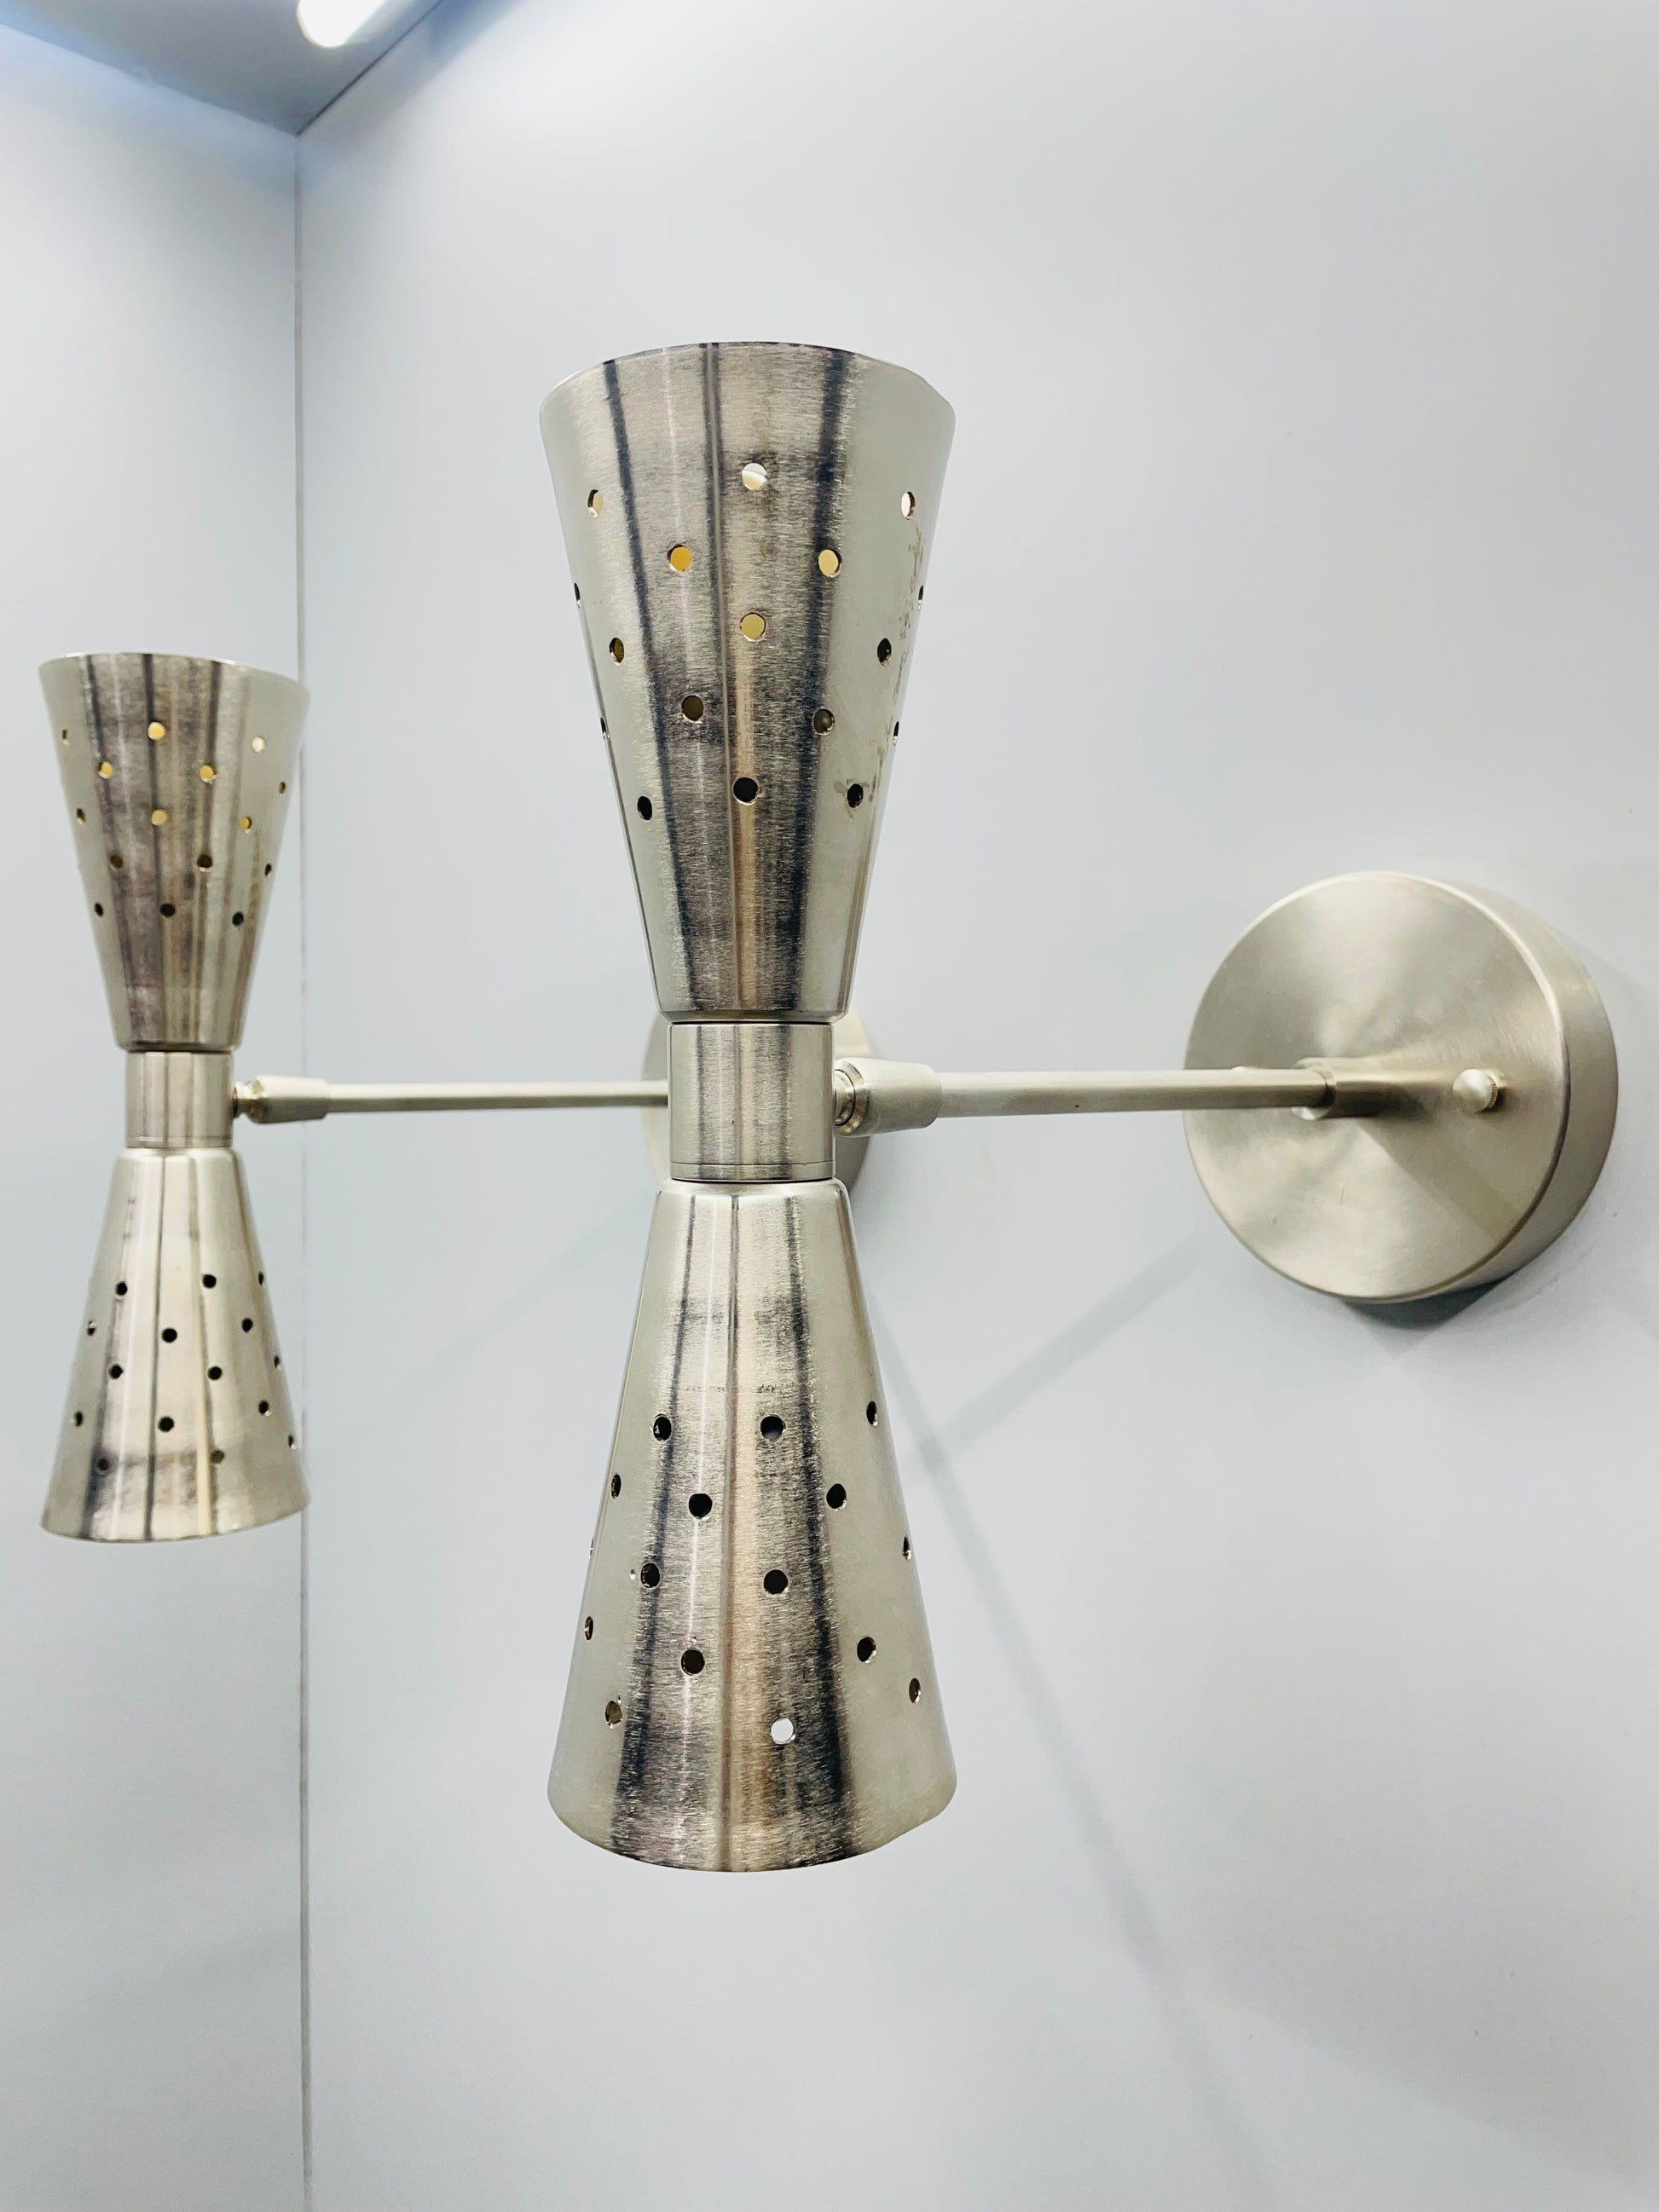 Dual Cone Wall Sconces with Mid-Century Modern Bow Tie Design